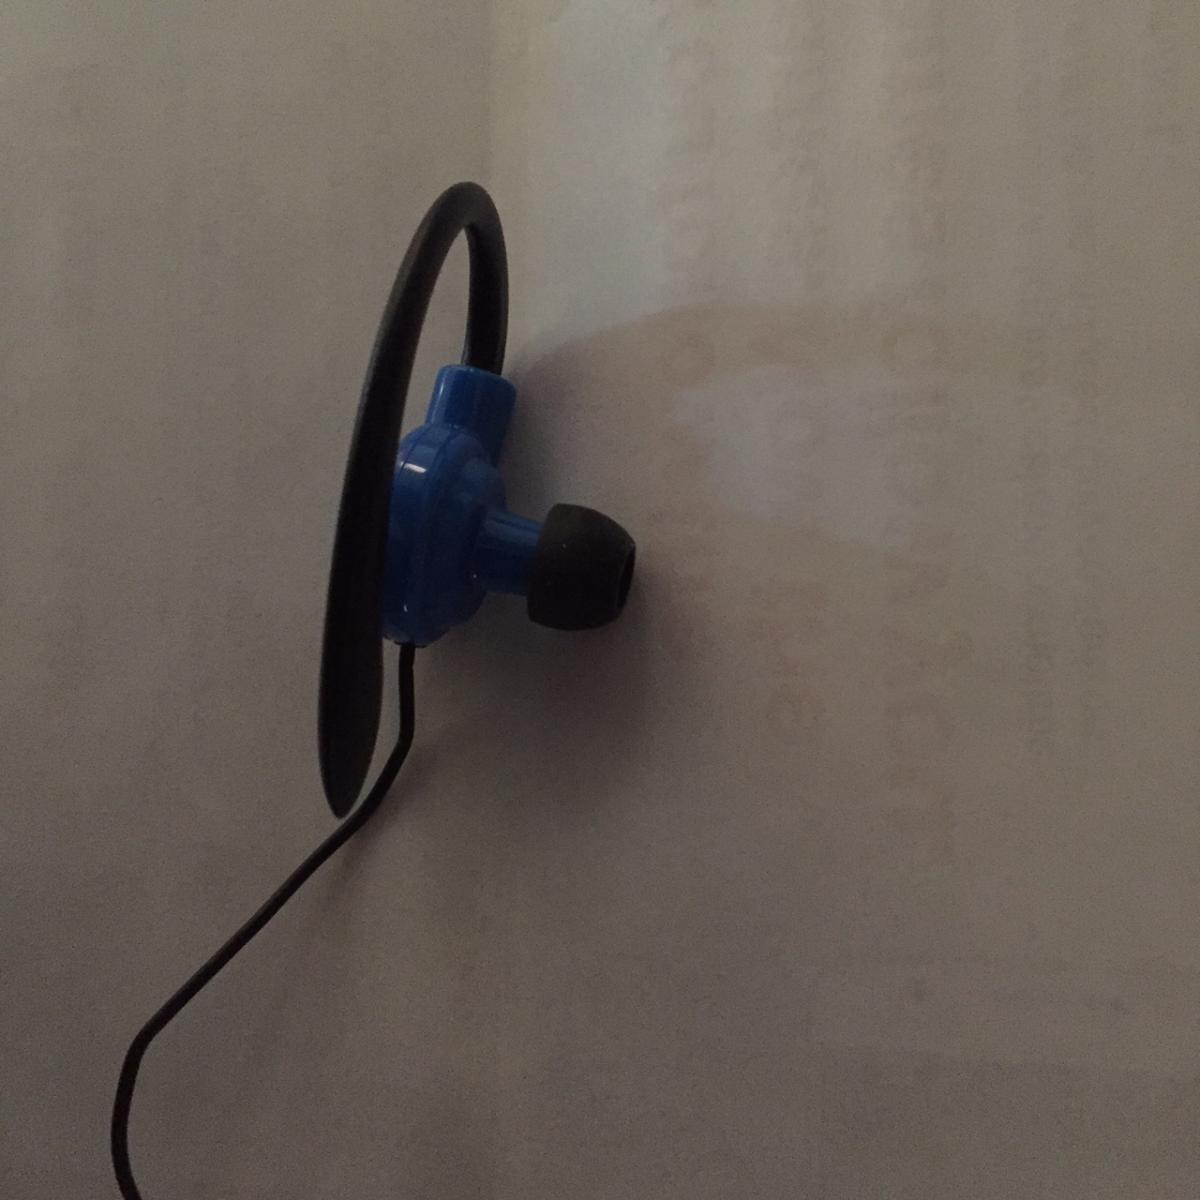 Earbuds with over the ear hooks